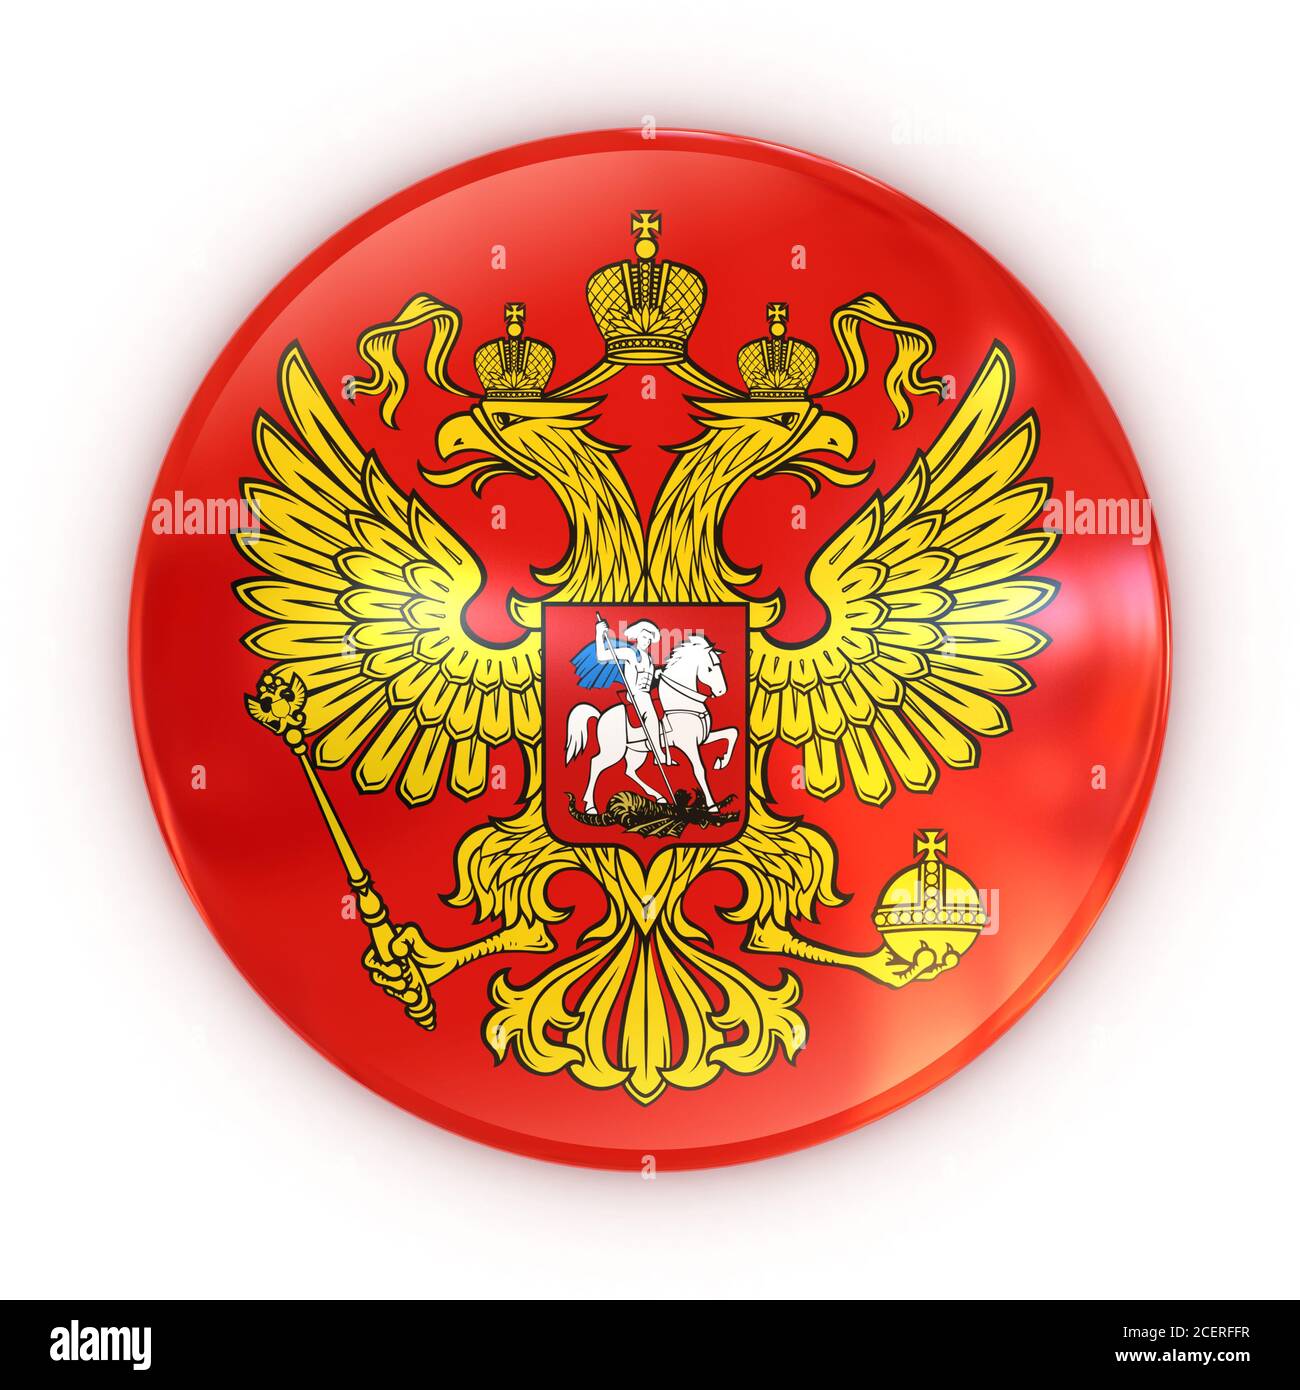 Flag of Russia. Coat of Arms. Stock Vector by ©Igor_Vkv 120839496